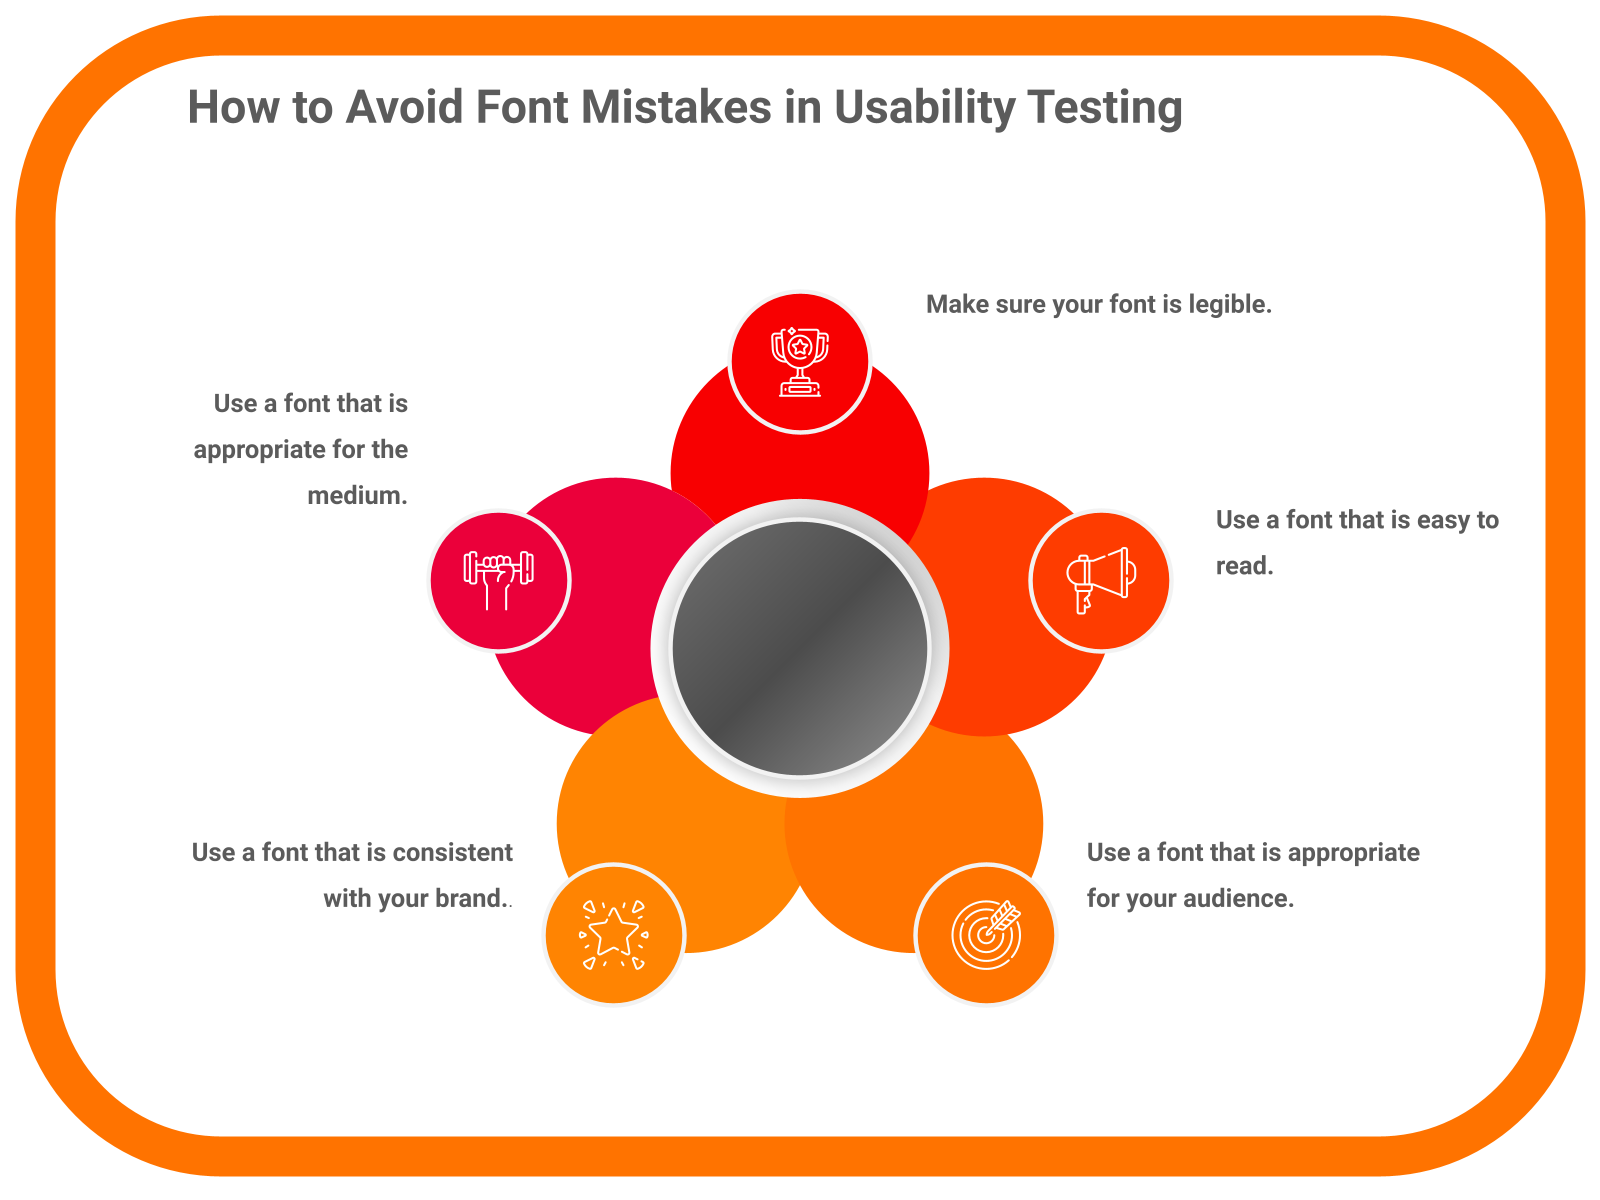 How to Avoid Font Mistakes in Usability Testing